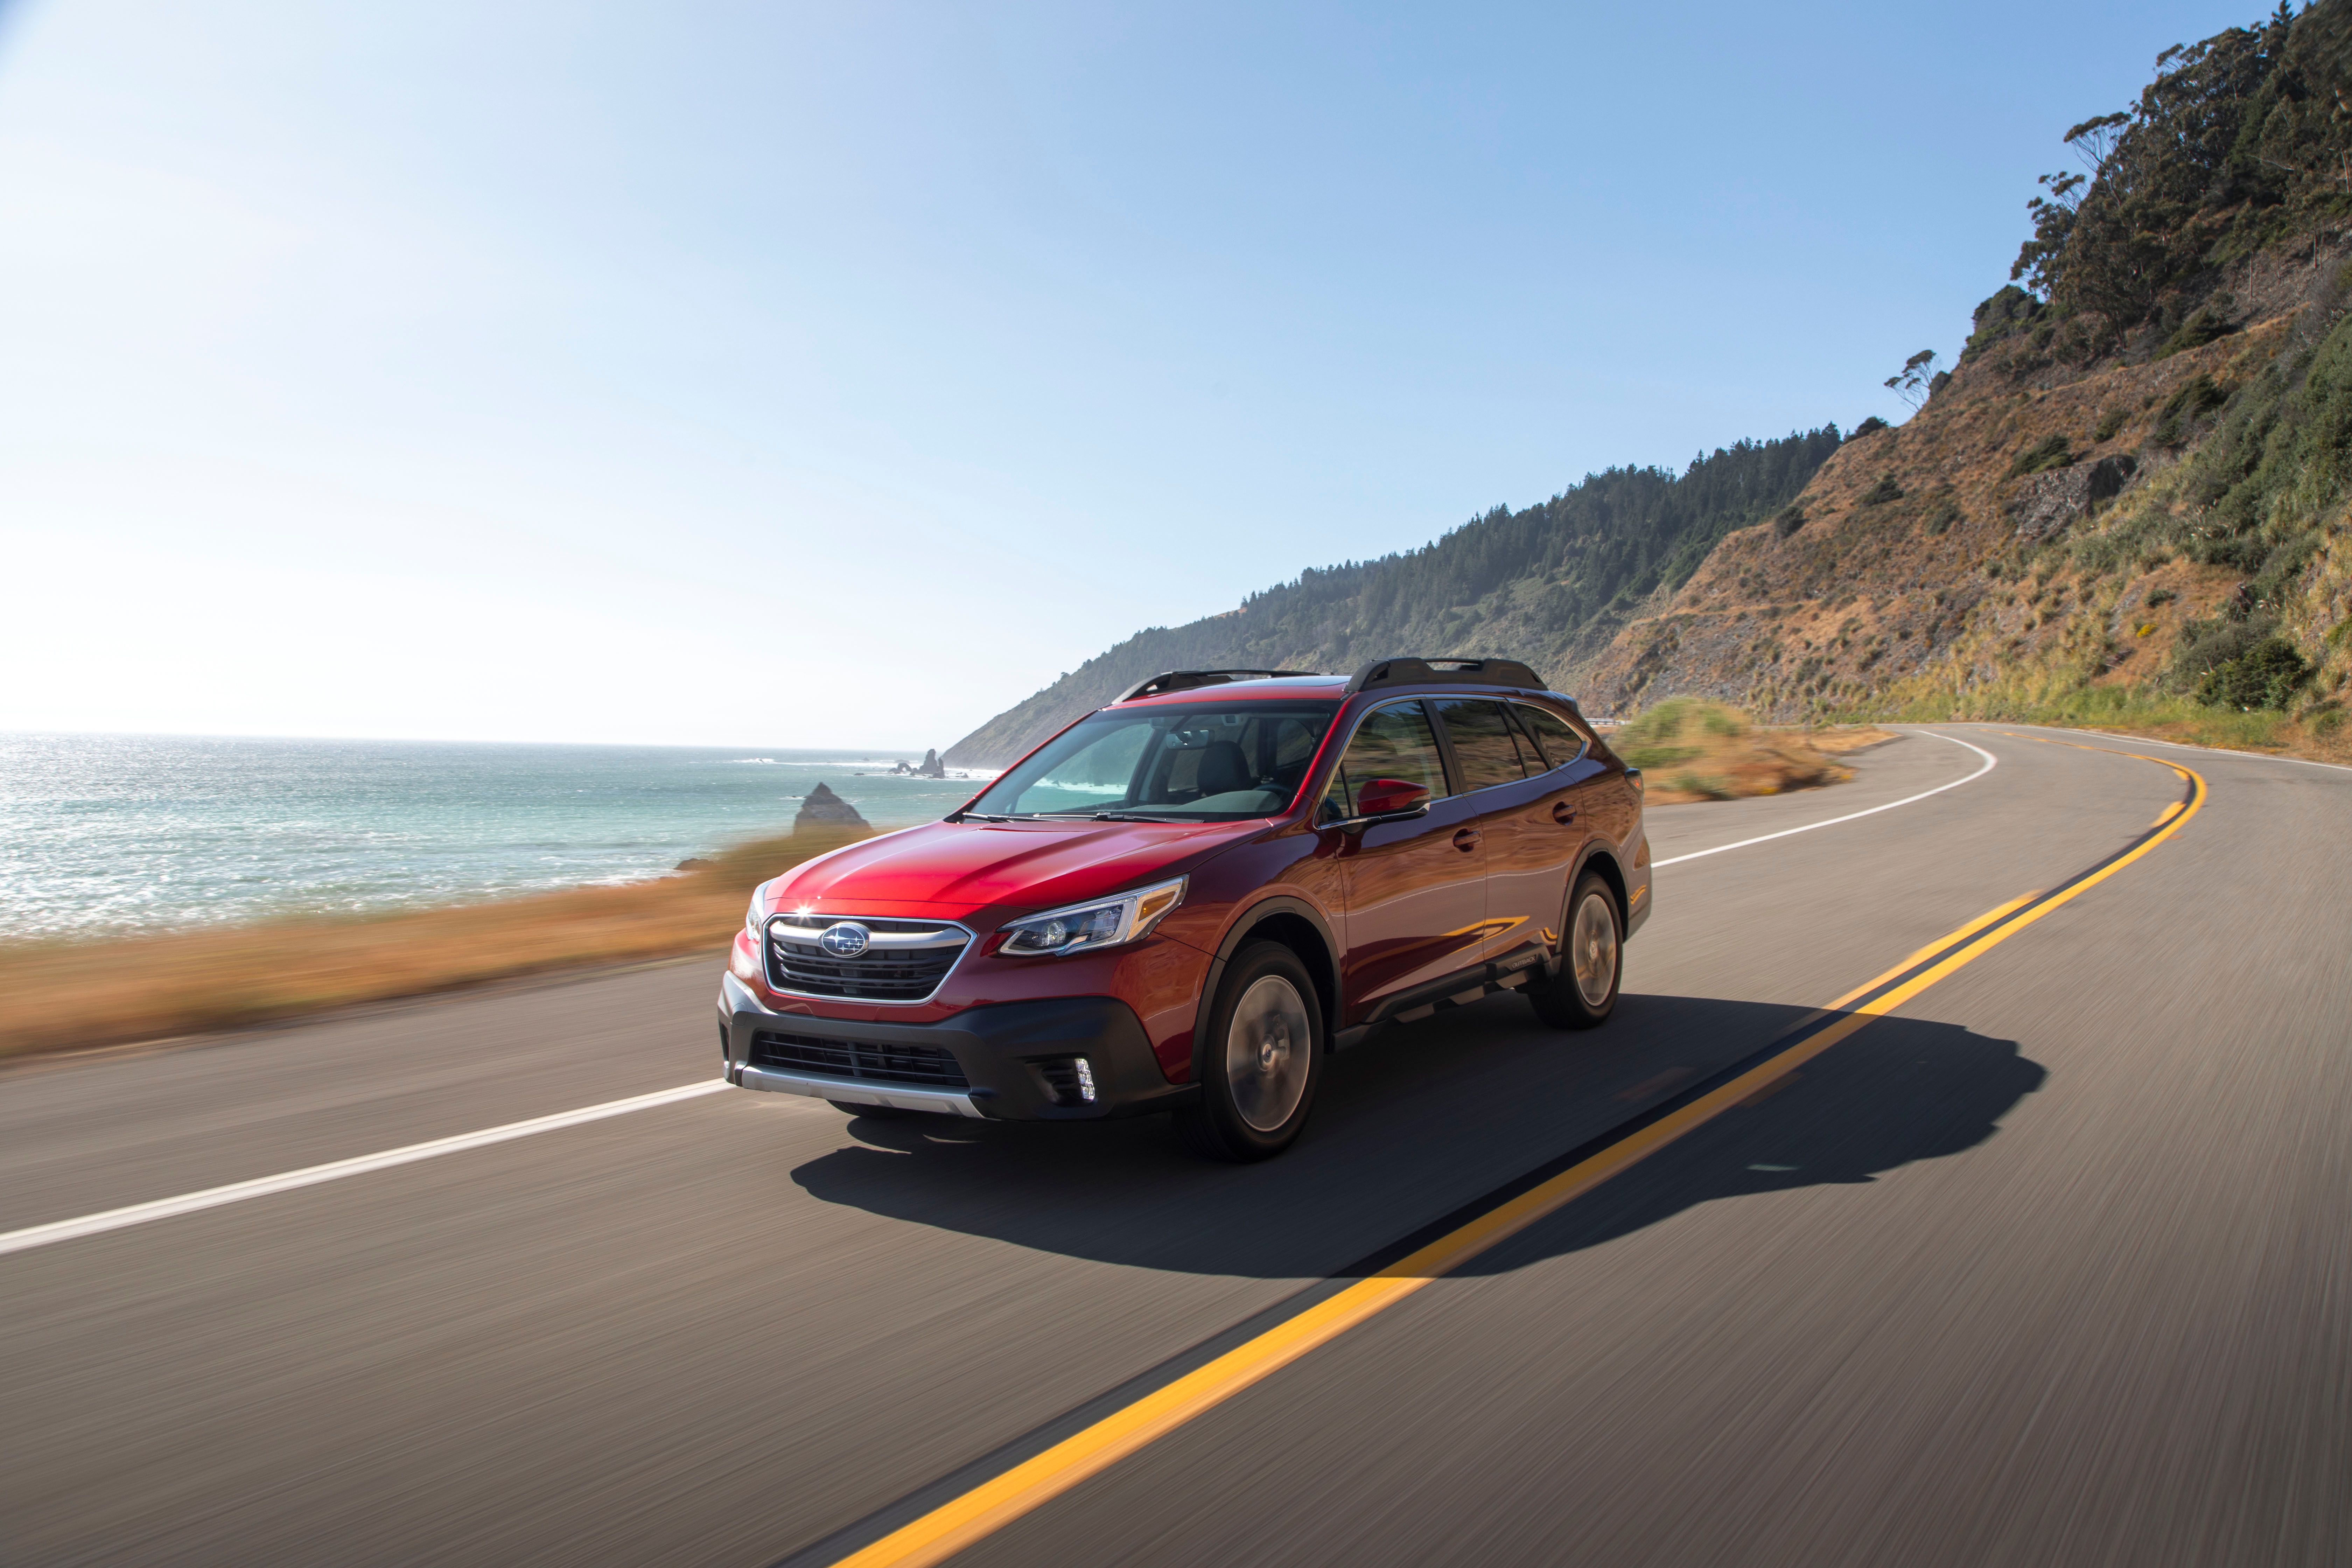 Red 2022 Subaru Outback speeds up on the road